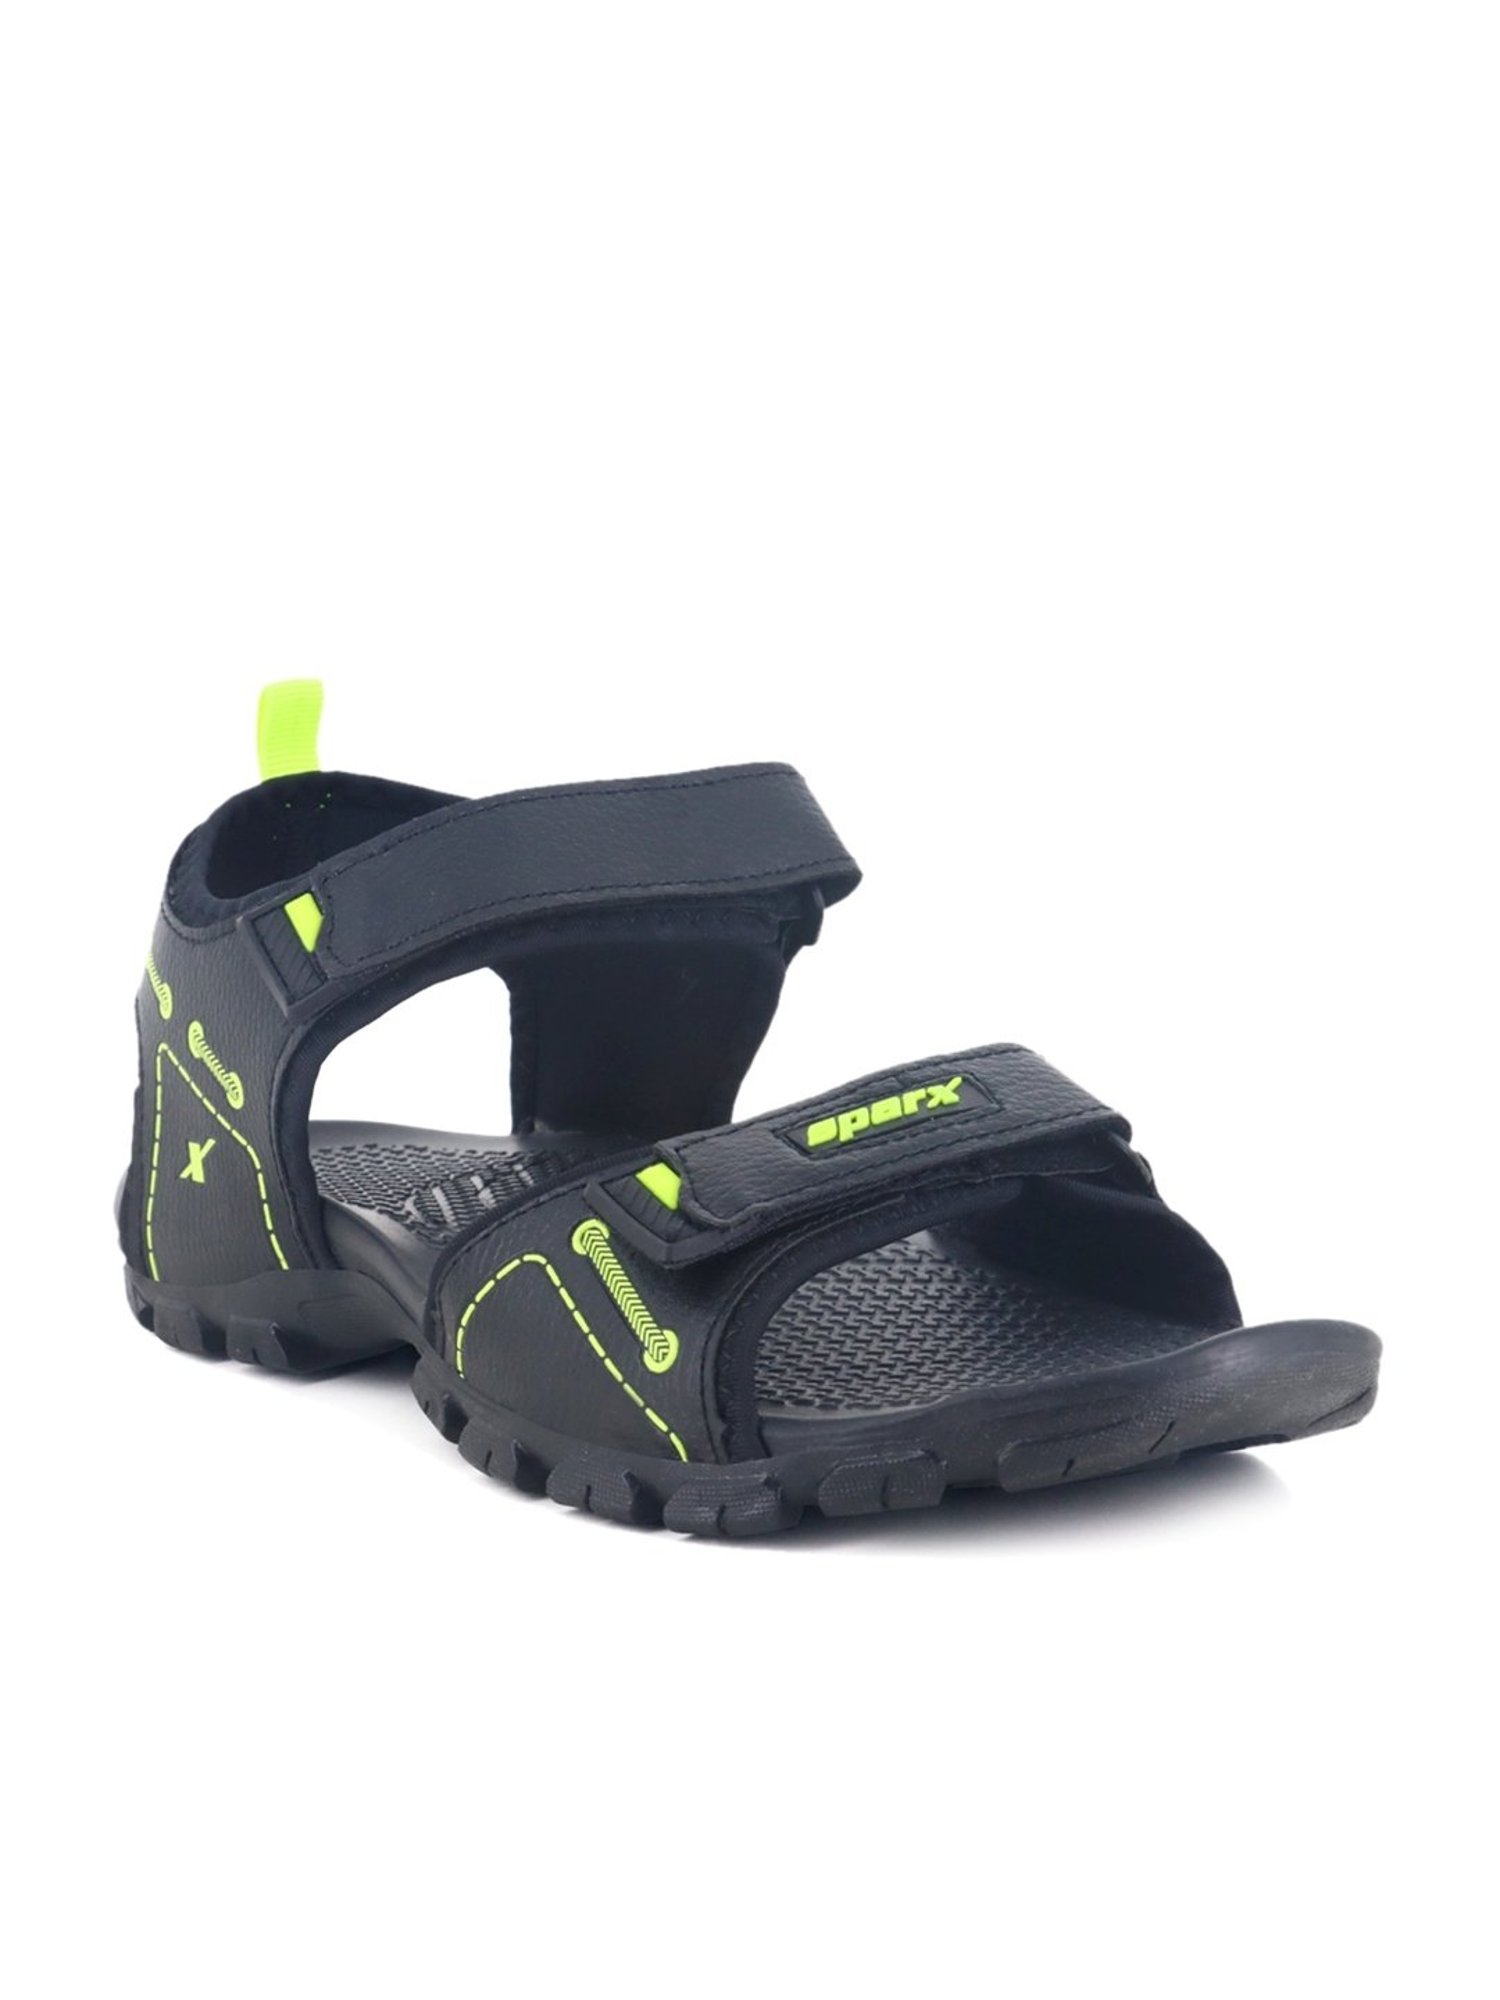 Top more than 184 sparx sandal gents best